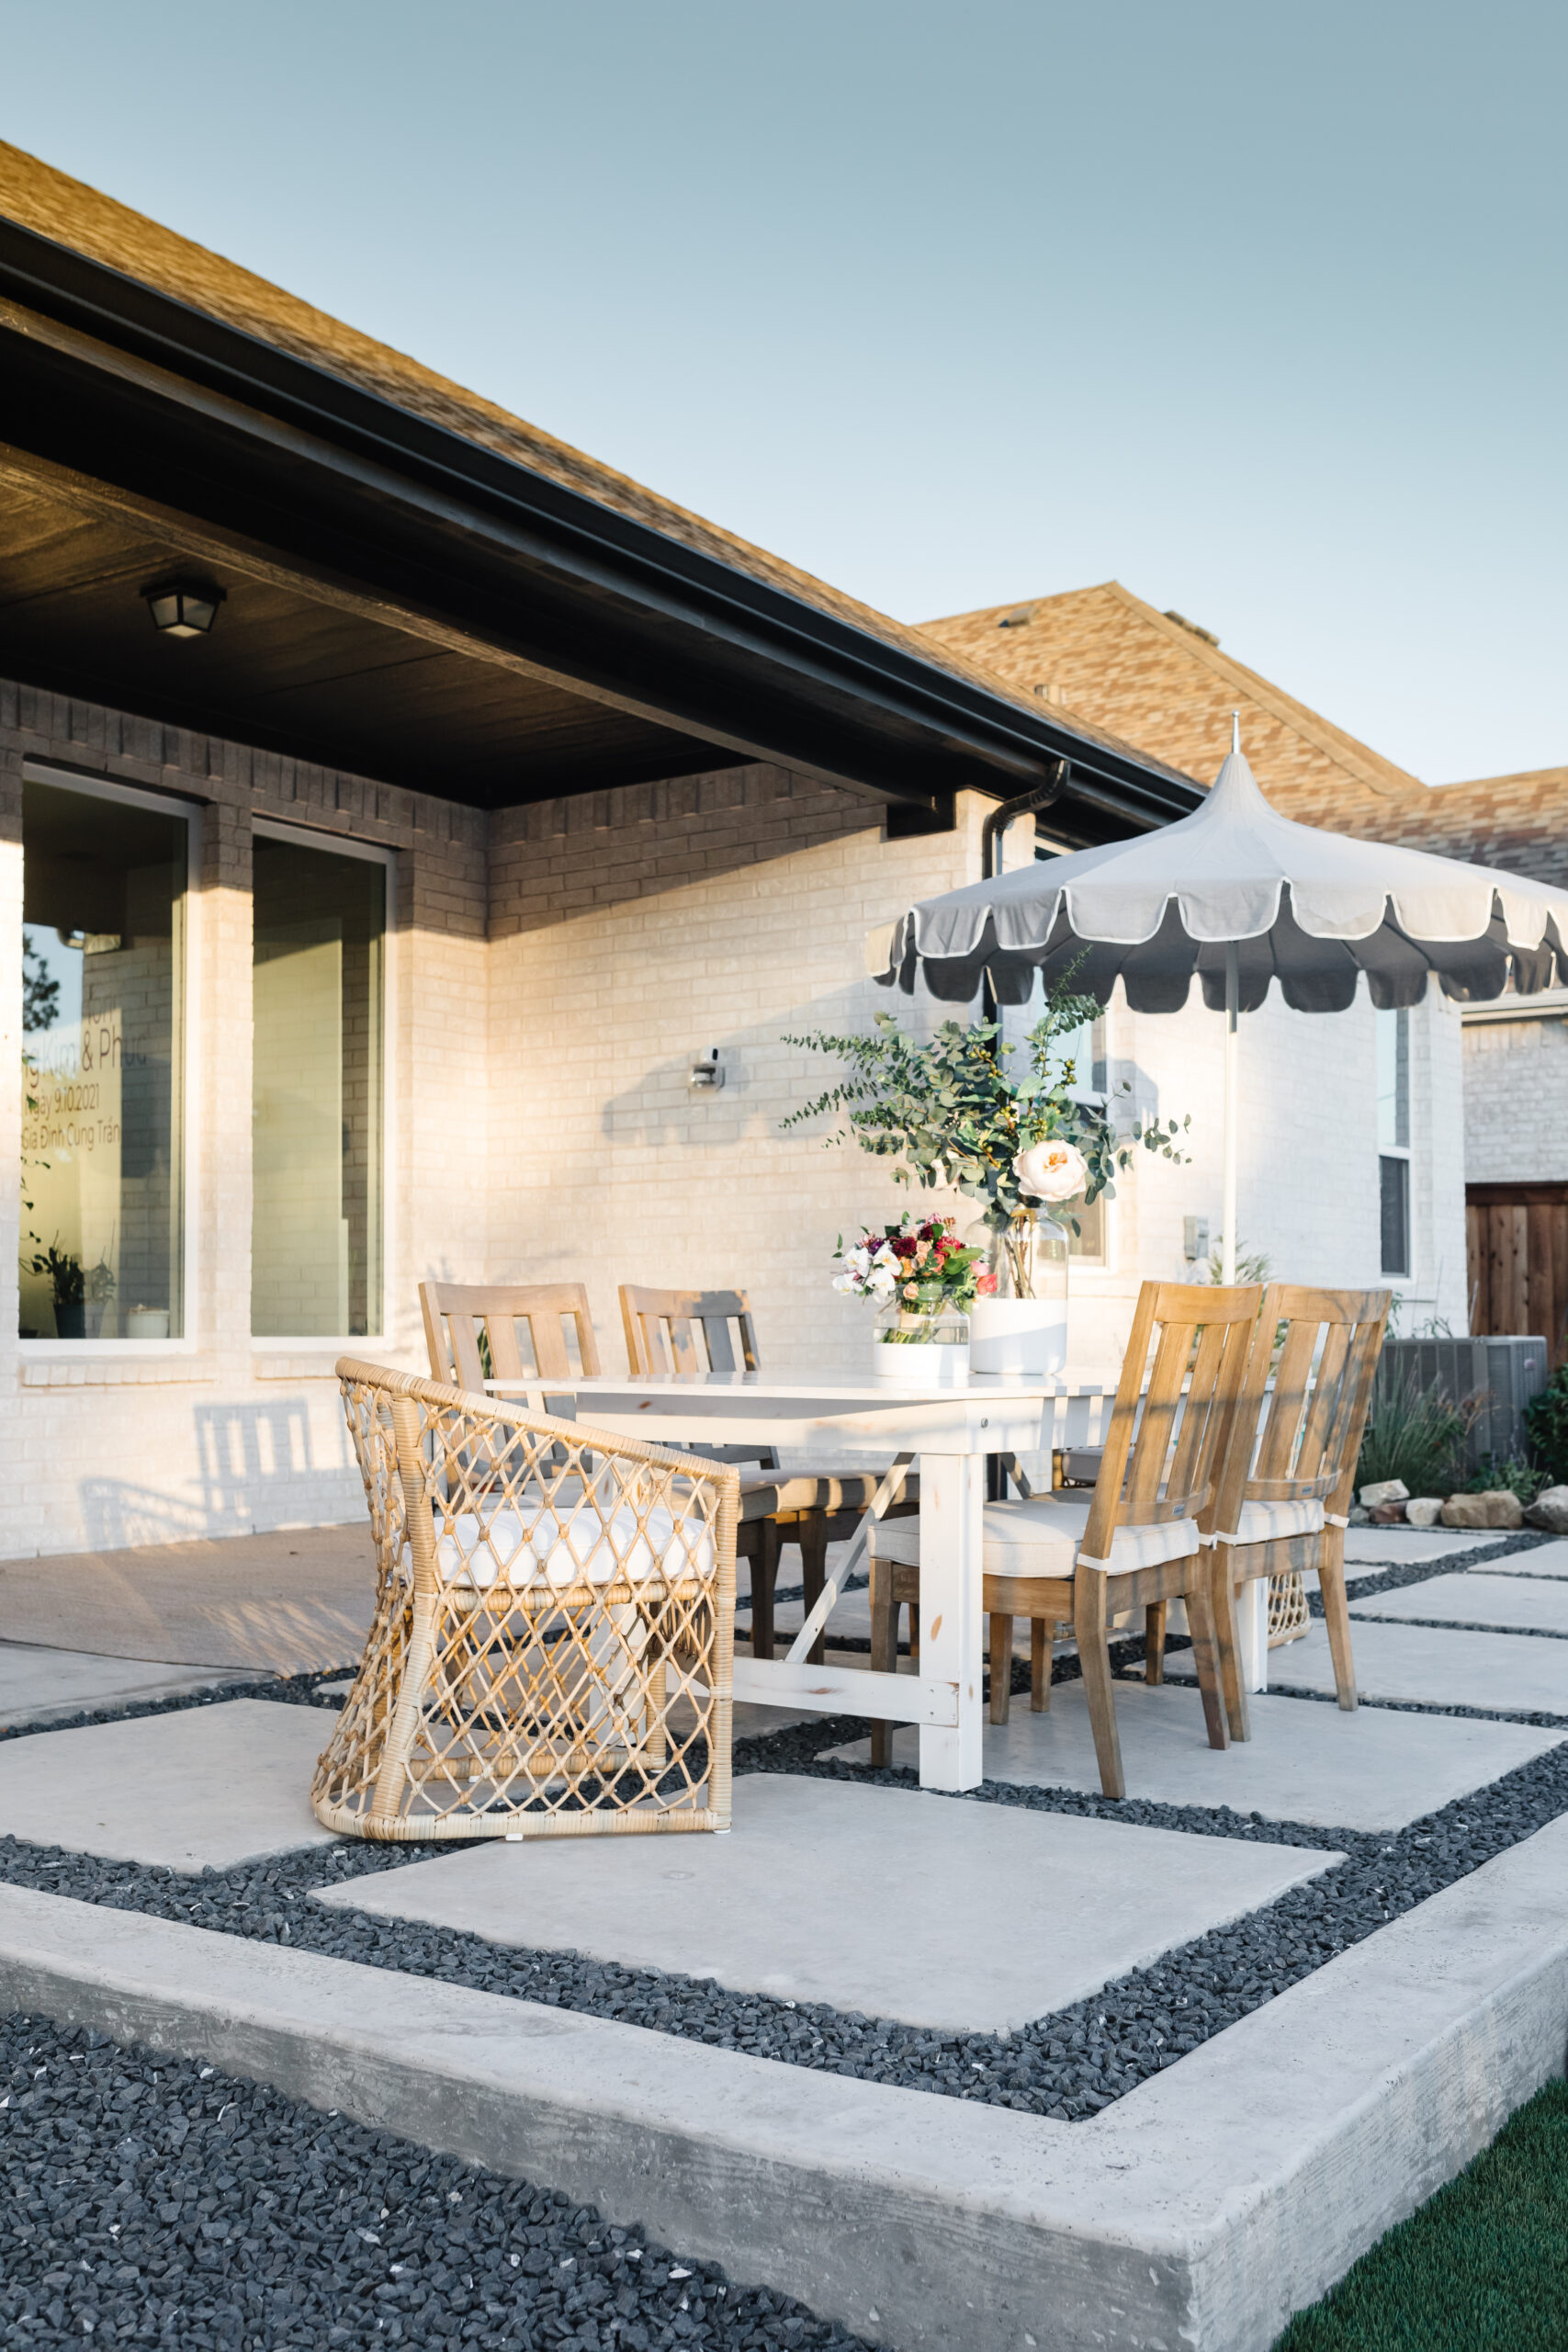 Backyard oasis ideas from blogger Hoang-Kim Cung with Serena & Lily and Yardzen